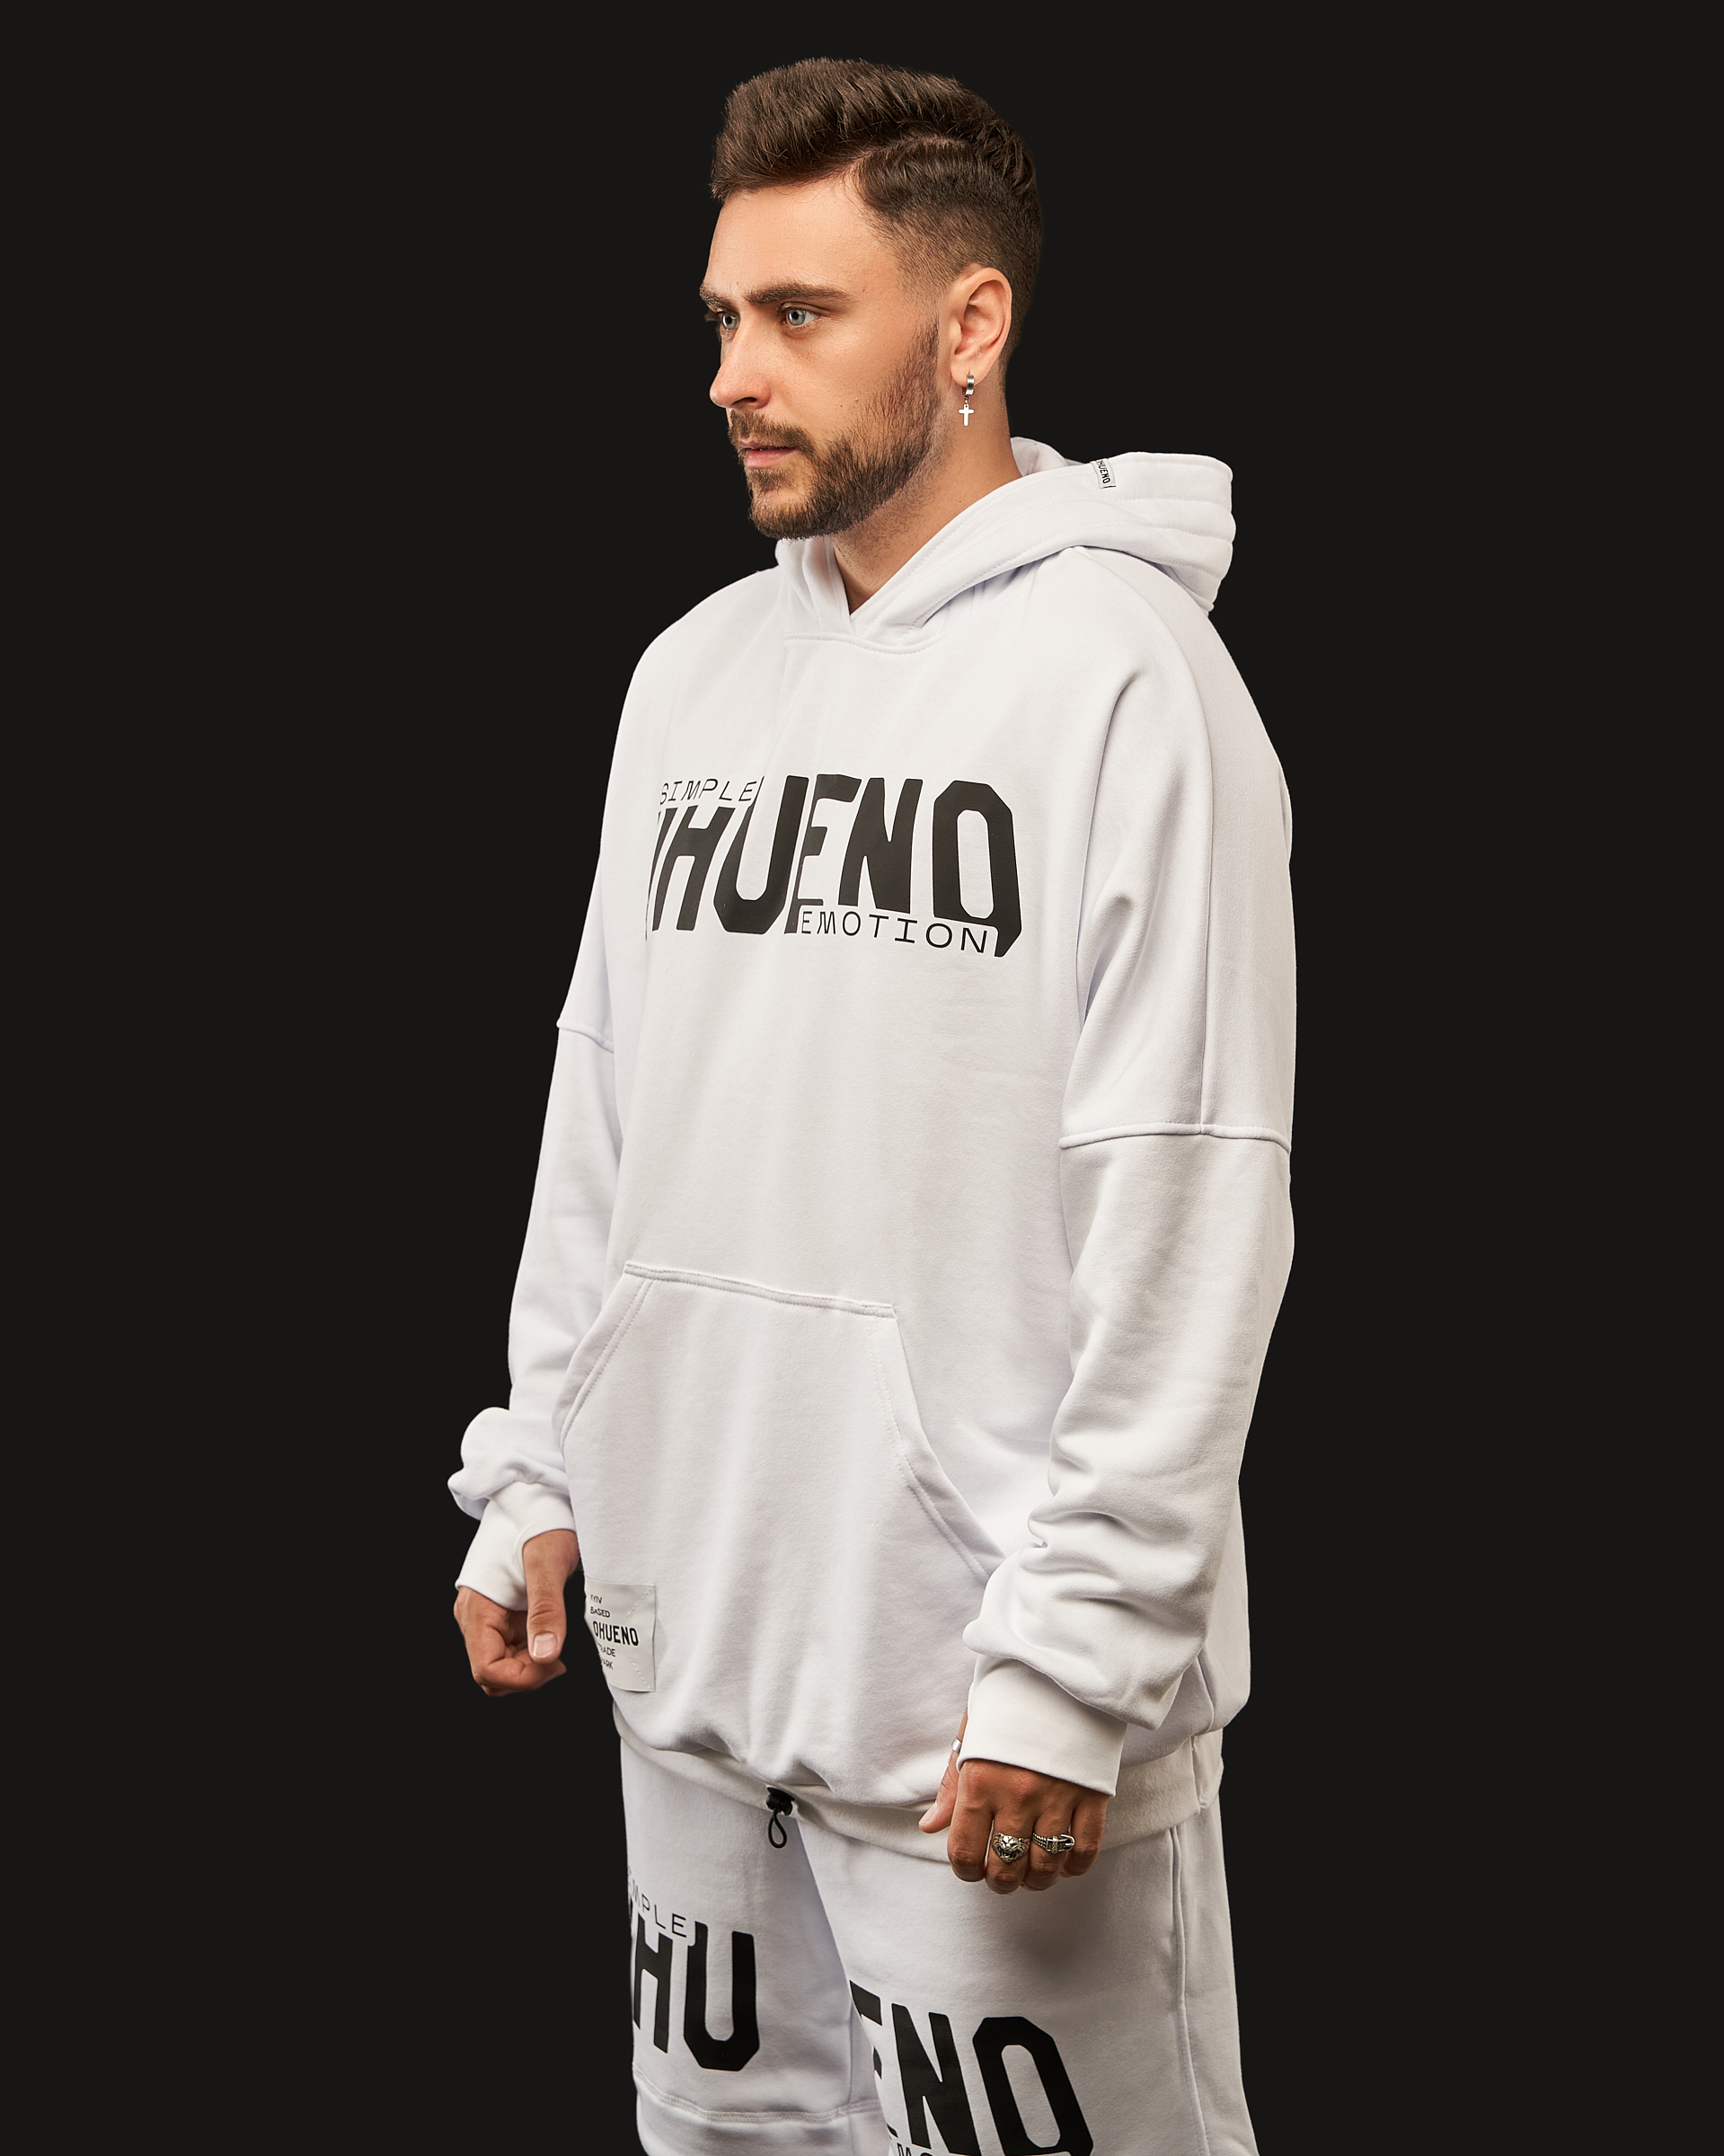 Oversized hoodie (white) Image: https://ohueno-official.com/wp-content/uploads/m01976.jpg